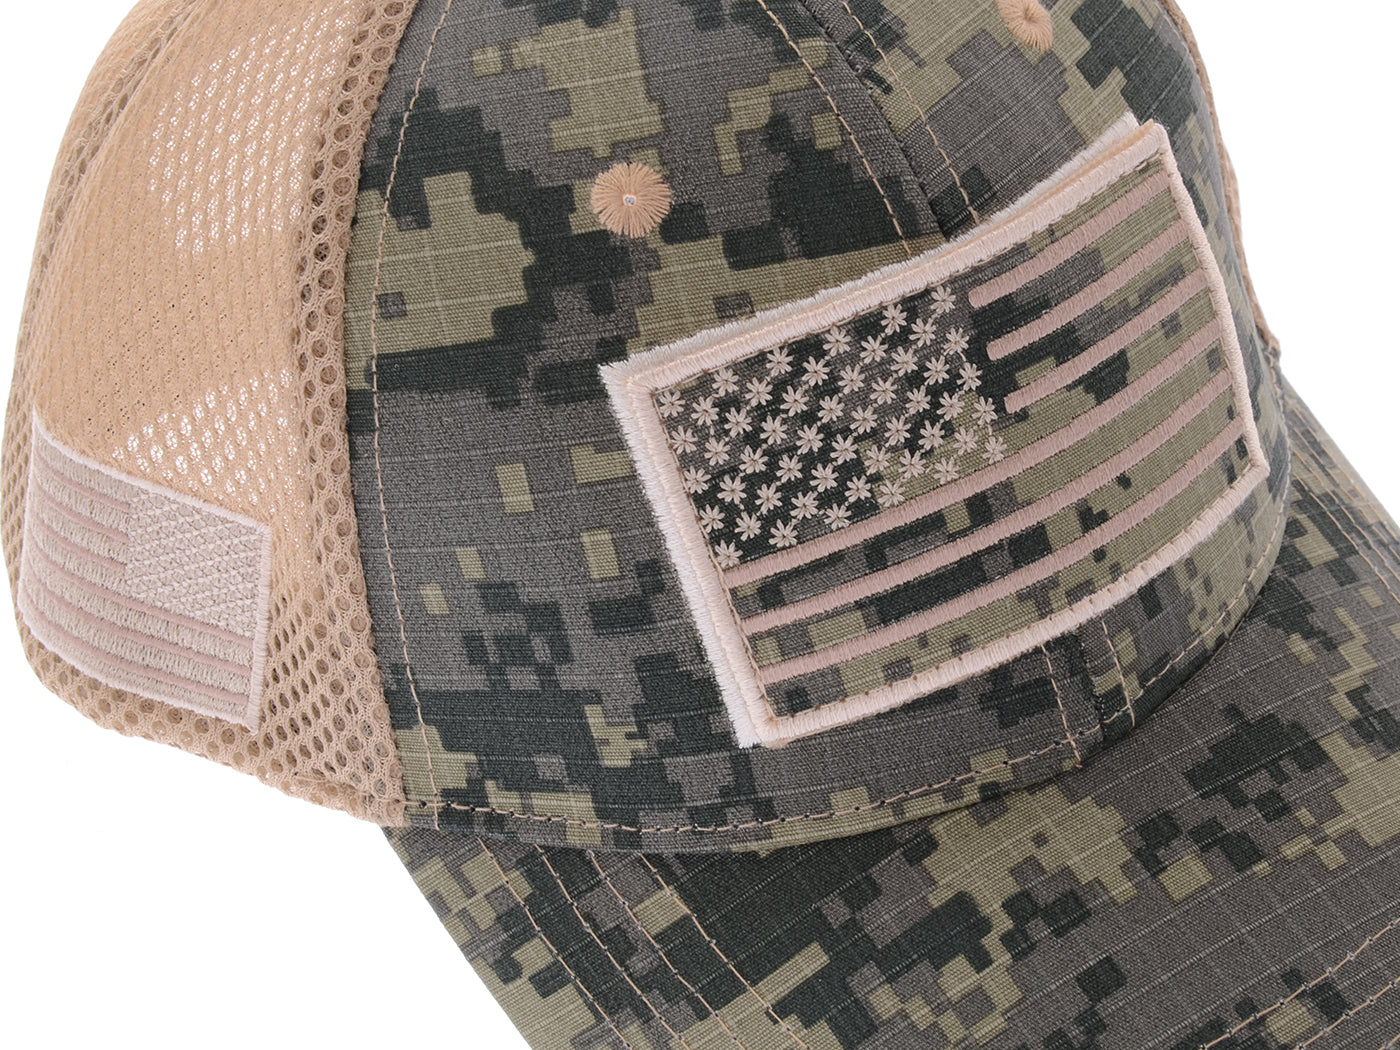 Camouflage Special USA Flag Patch Baseball Cap